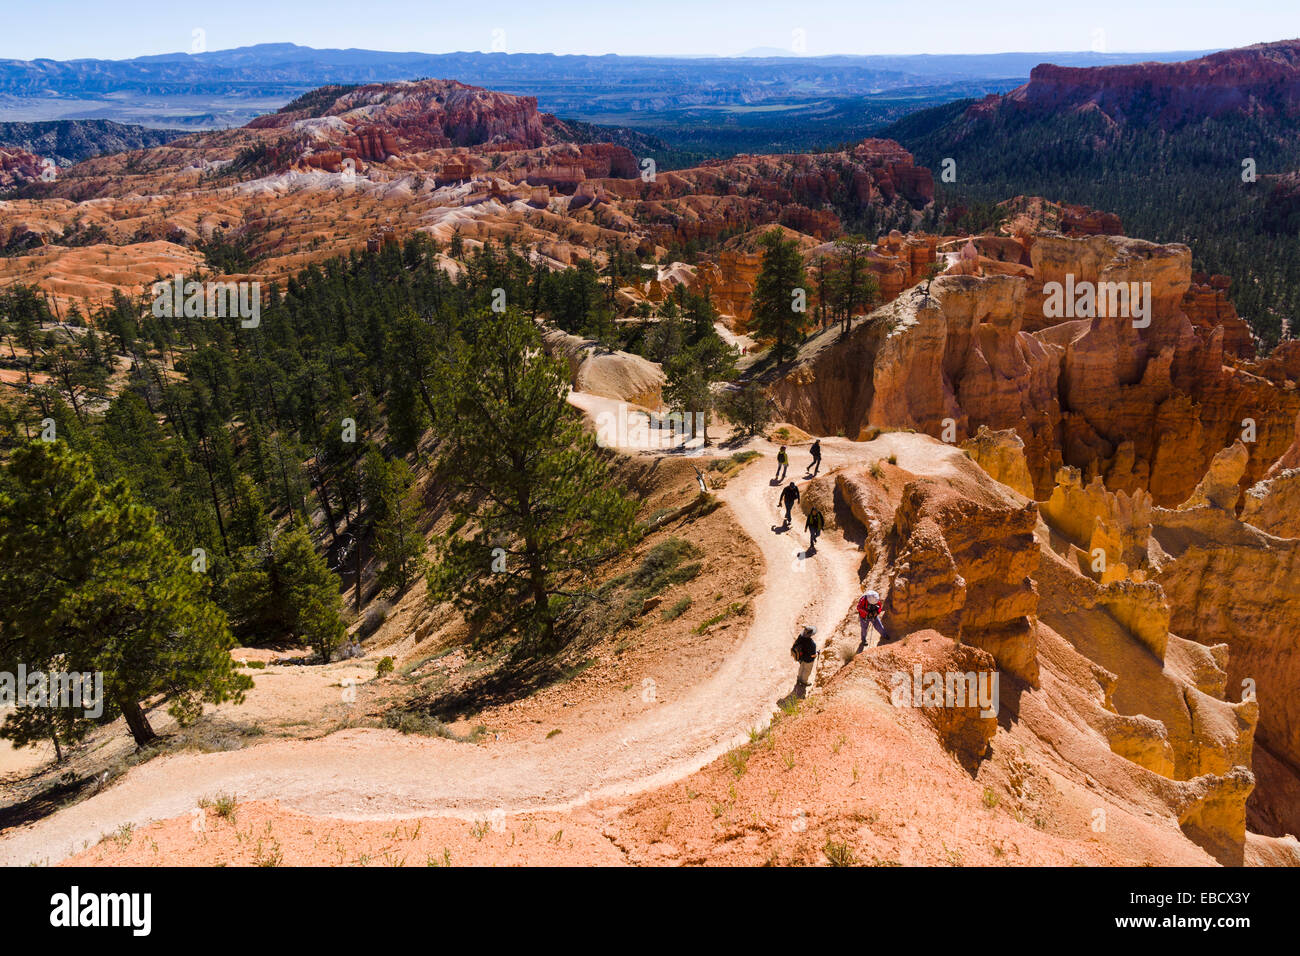 Hikers on the Queens Garden Trail. Bryce Canyon National Park, Utah, USA. Stock Photo